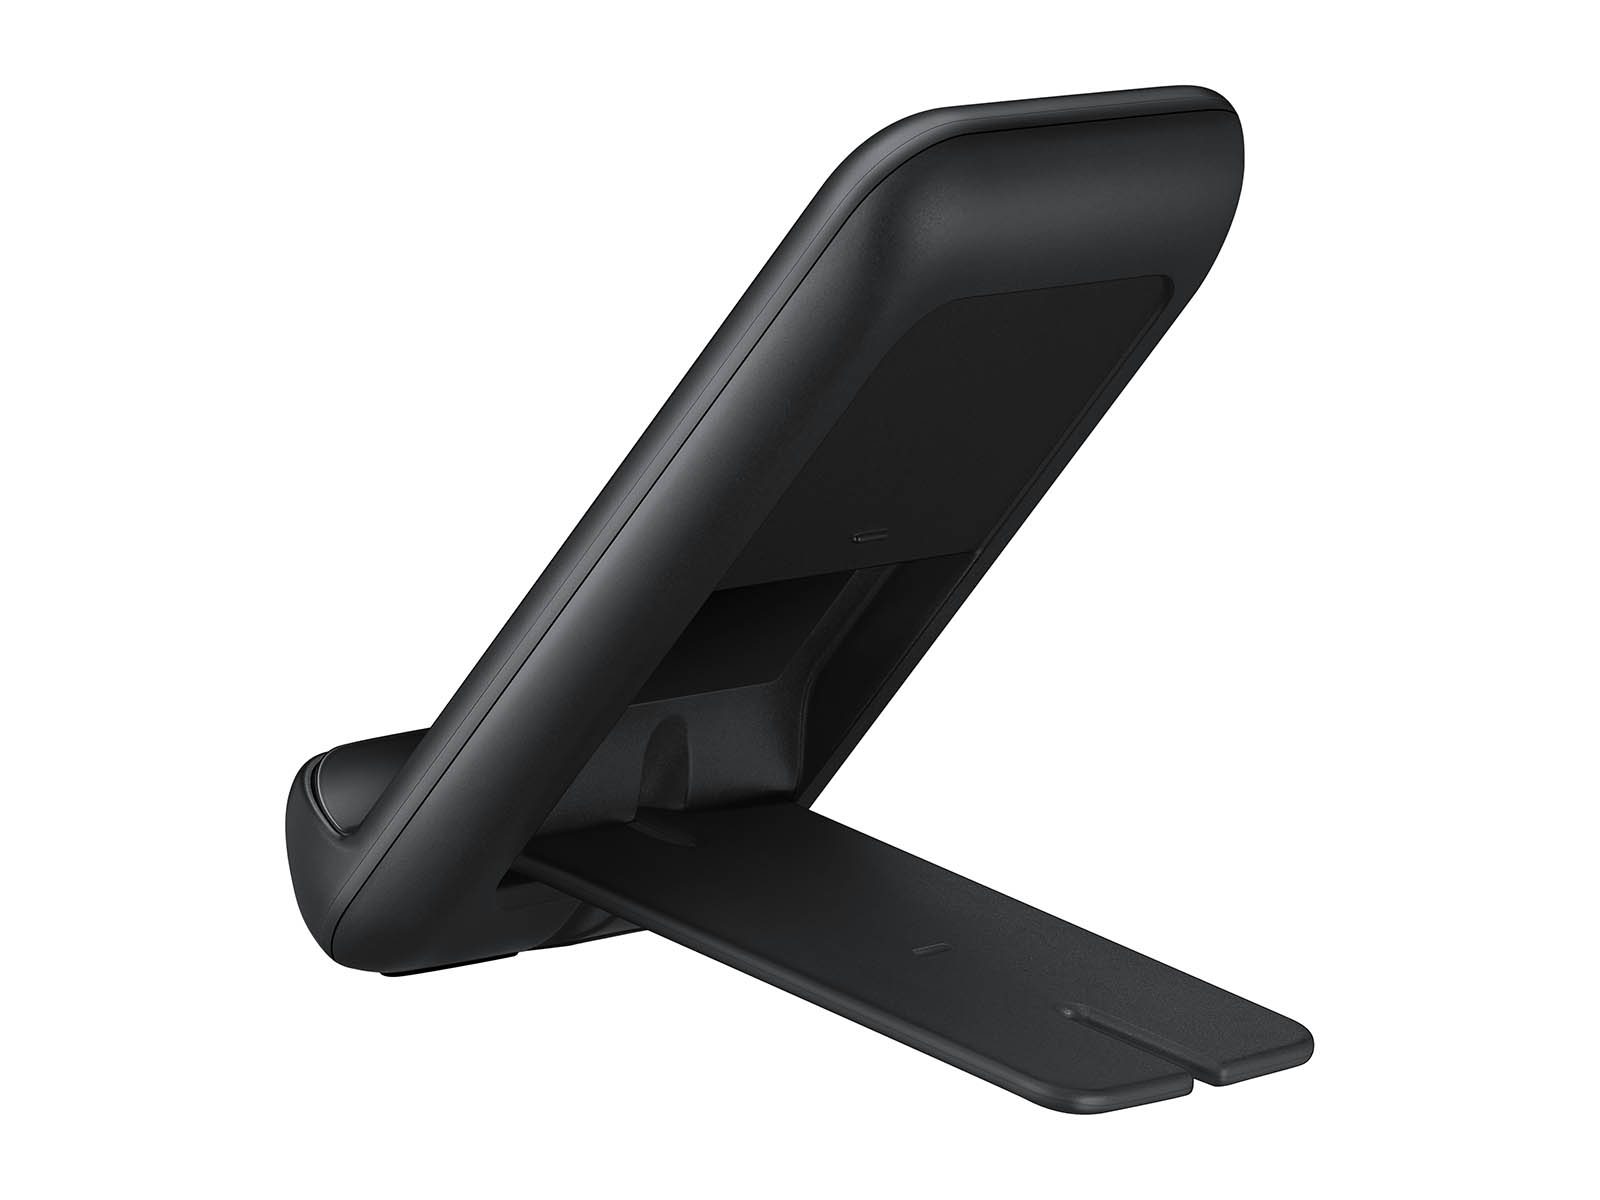 Wireless Charger Convertible, Black Mobile Accessories - EP-N3300TBEGUS